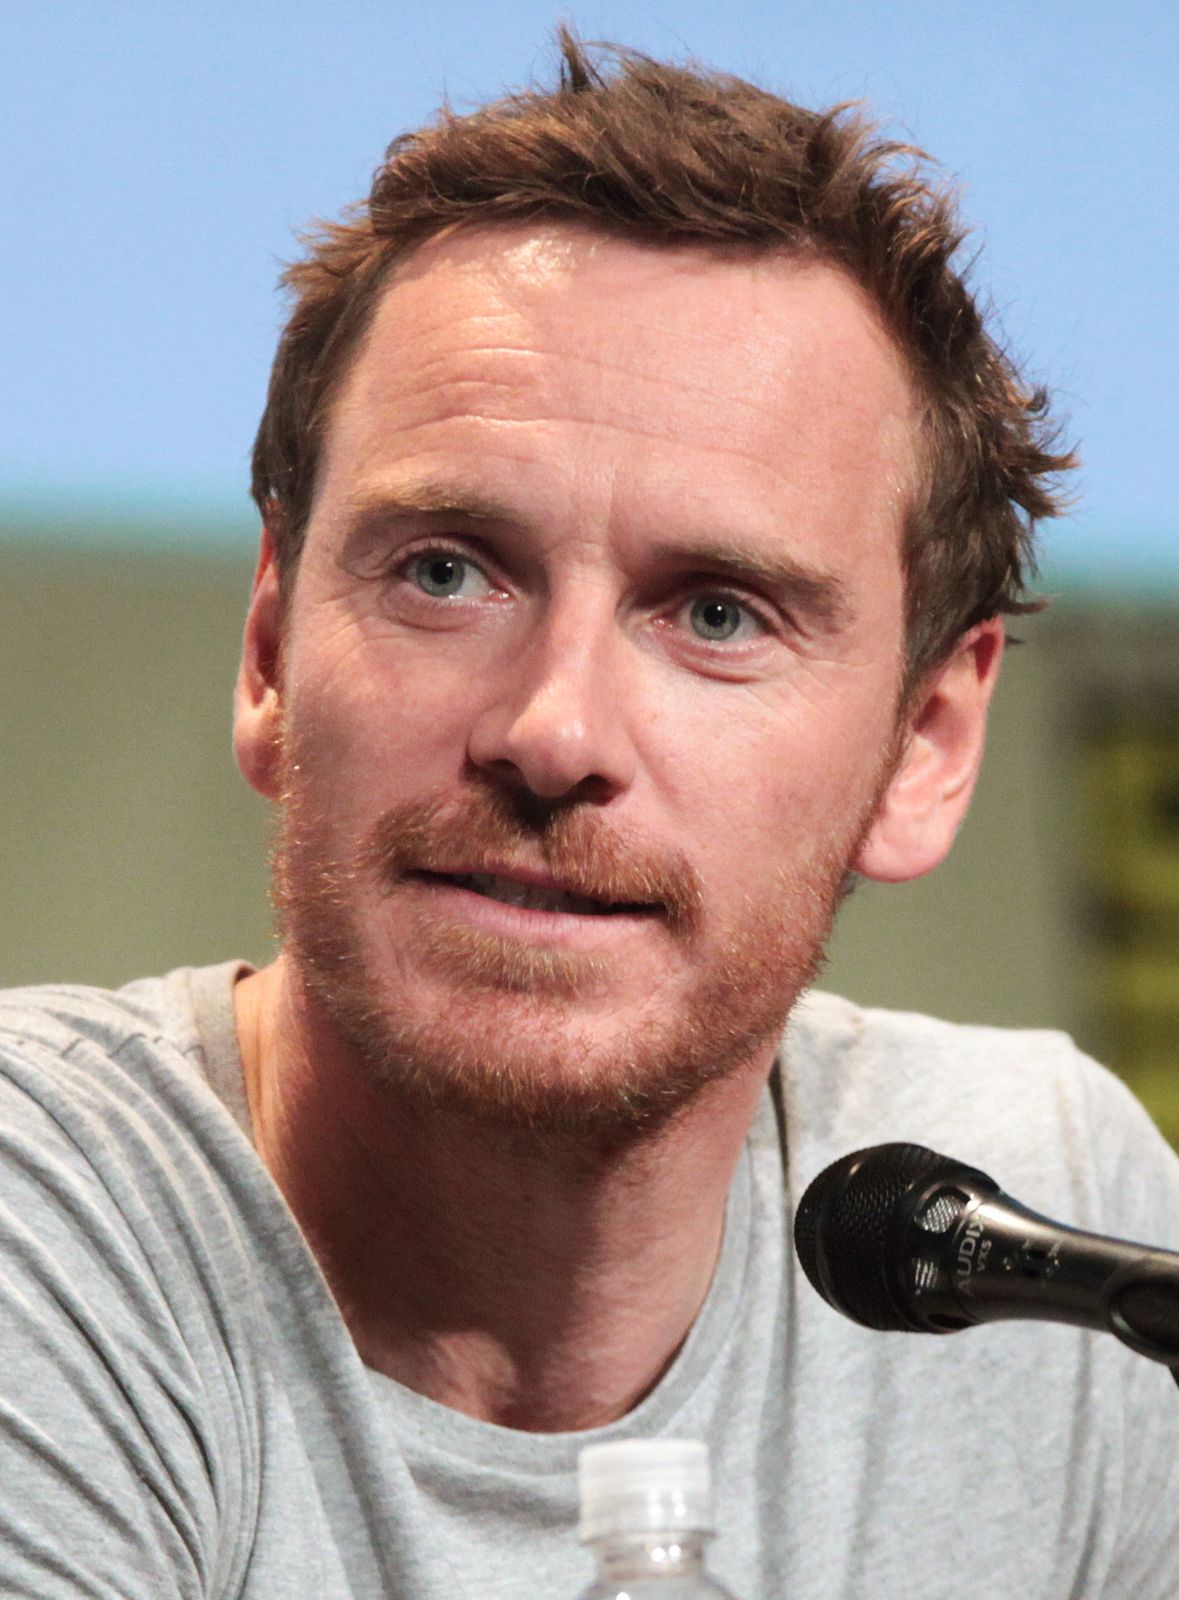 Here’s What Michael Fassbender Has To Say About Relationships